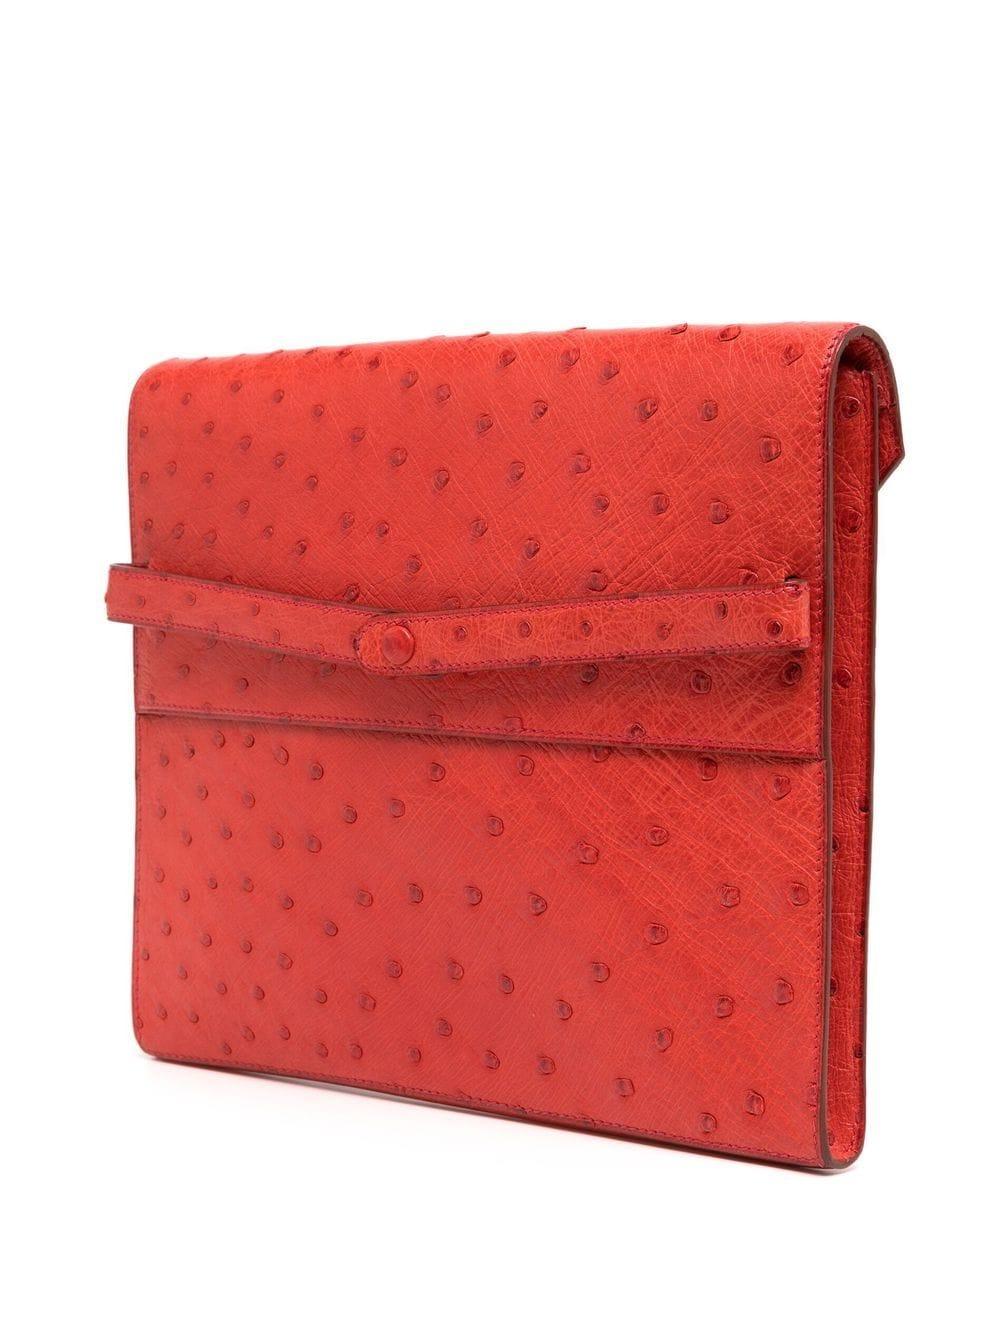 The Red Ostrich Liddy Clutch Bag is a timeless and elegant style with minimalistic sharp lines and Hermès’ keen preference for vibrant colours. Made from pebbled leather in a bright red hue, this rare and coveted clutch is a must-have in any